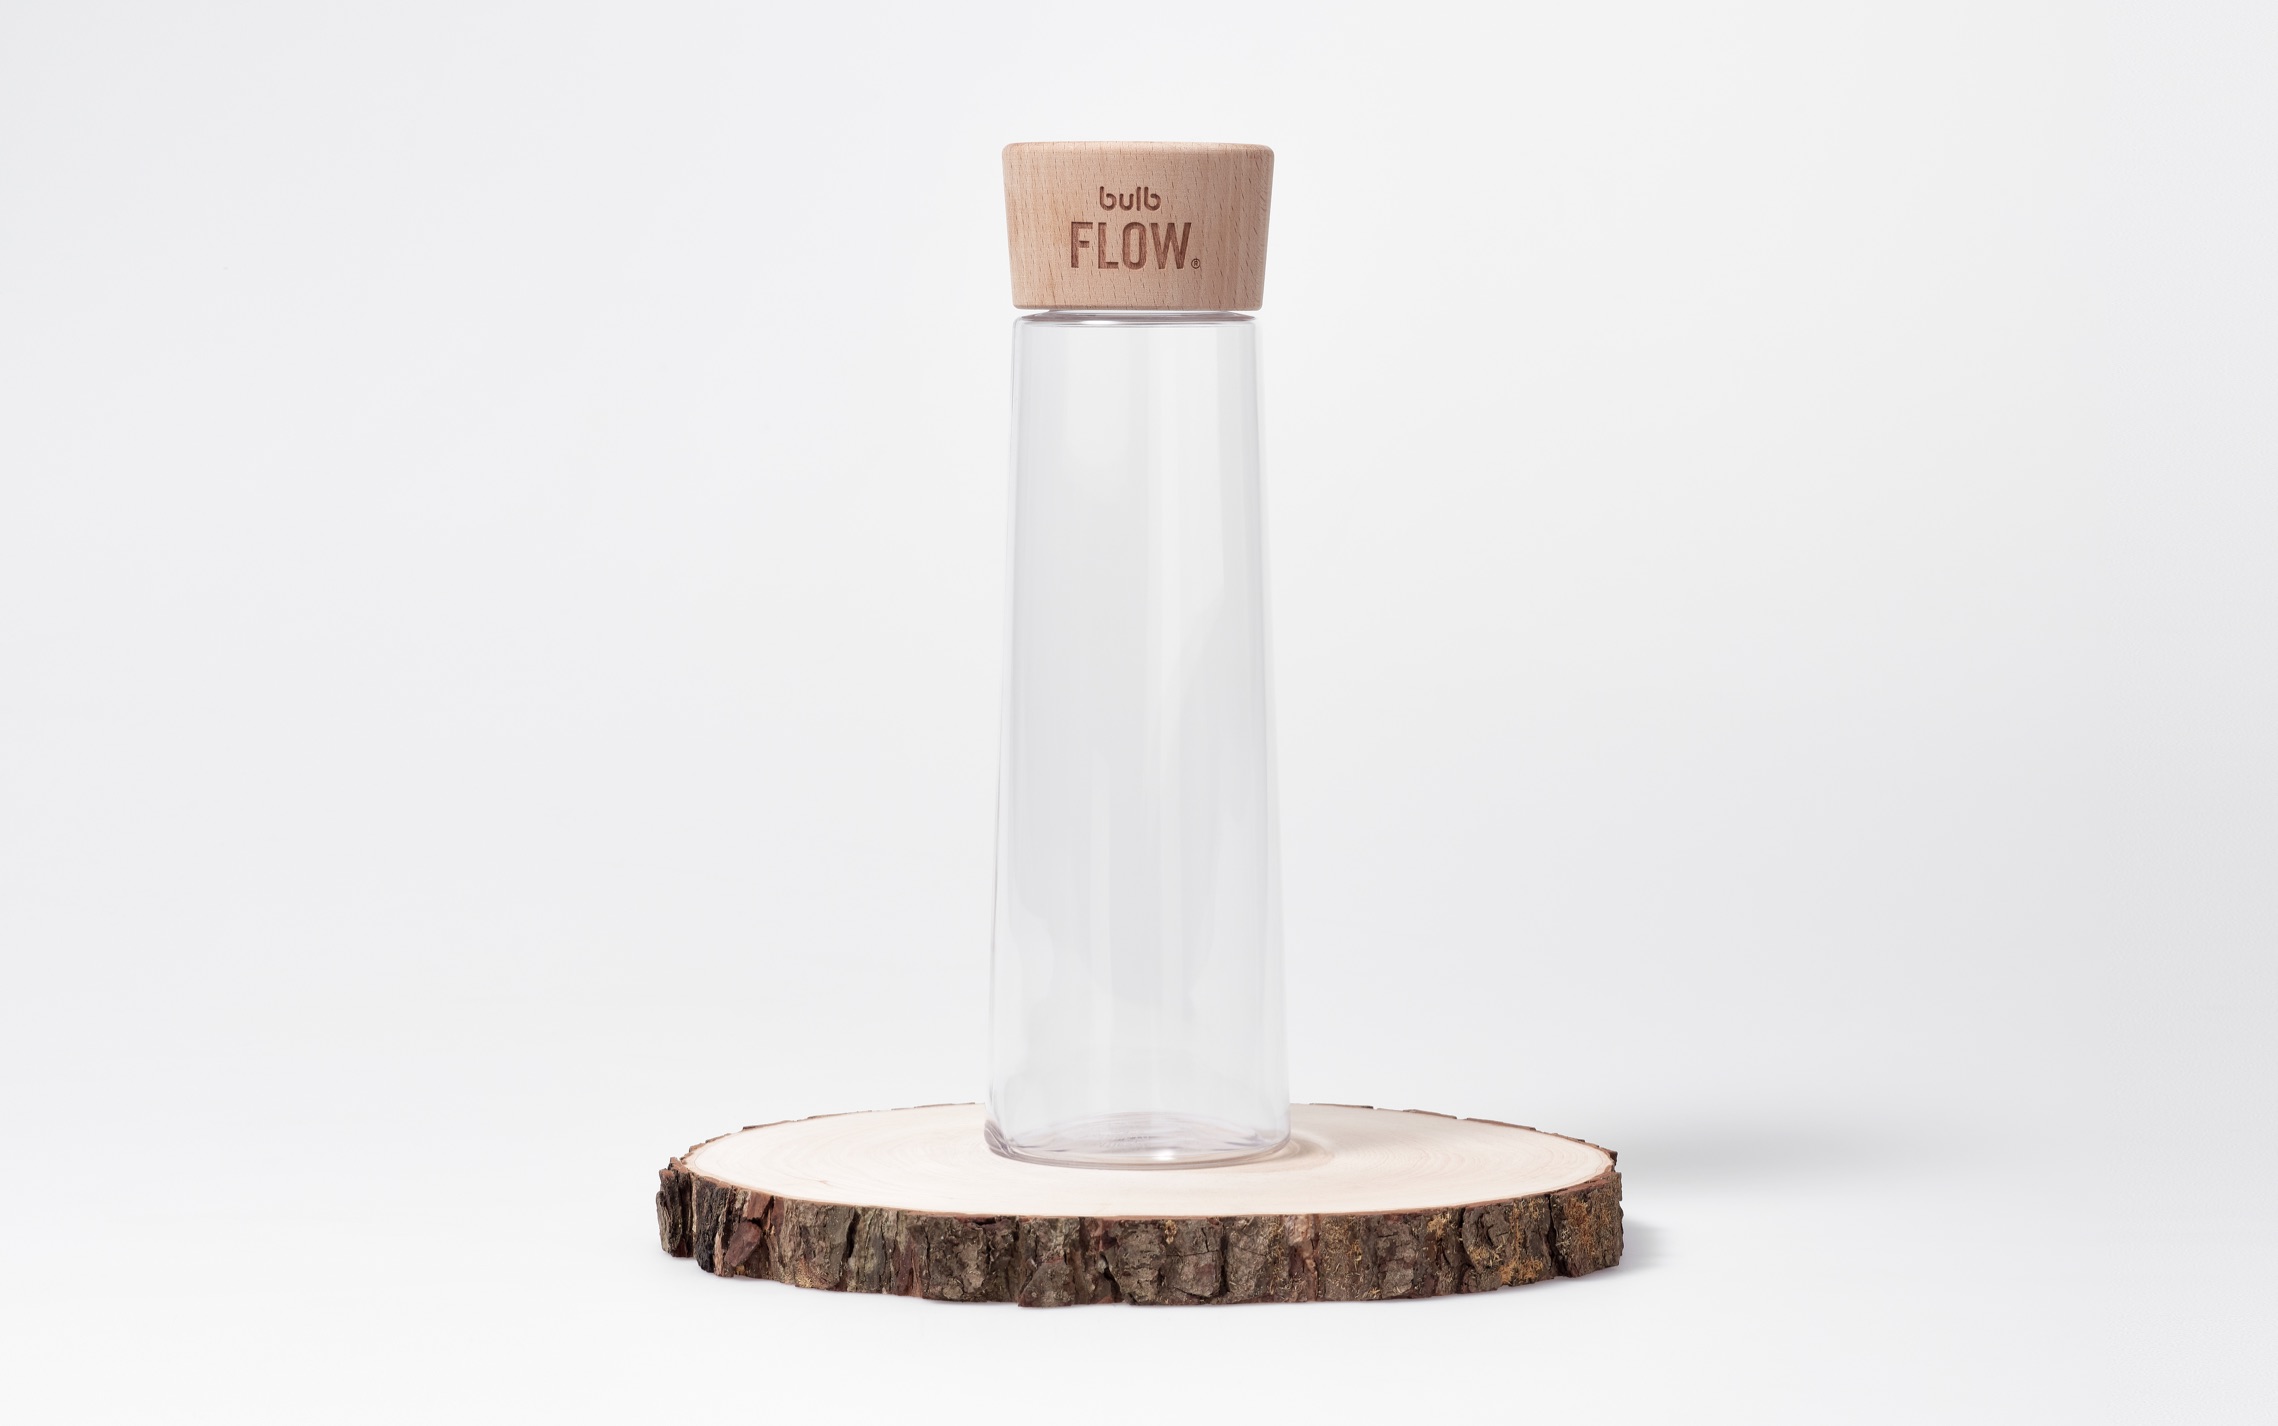 The FLOW drinking bottle embodies sustainability in its most beautiful form.